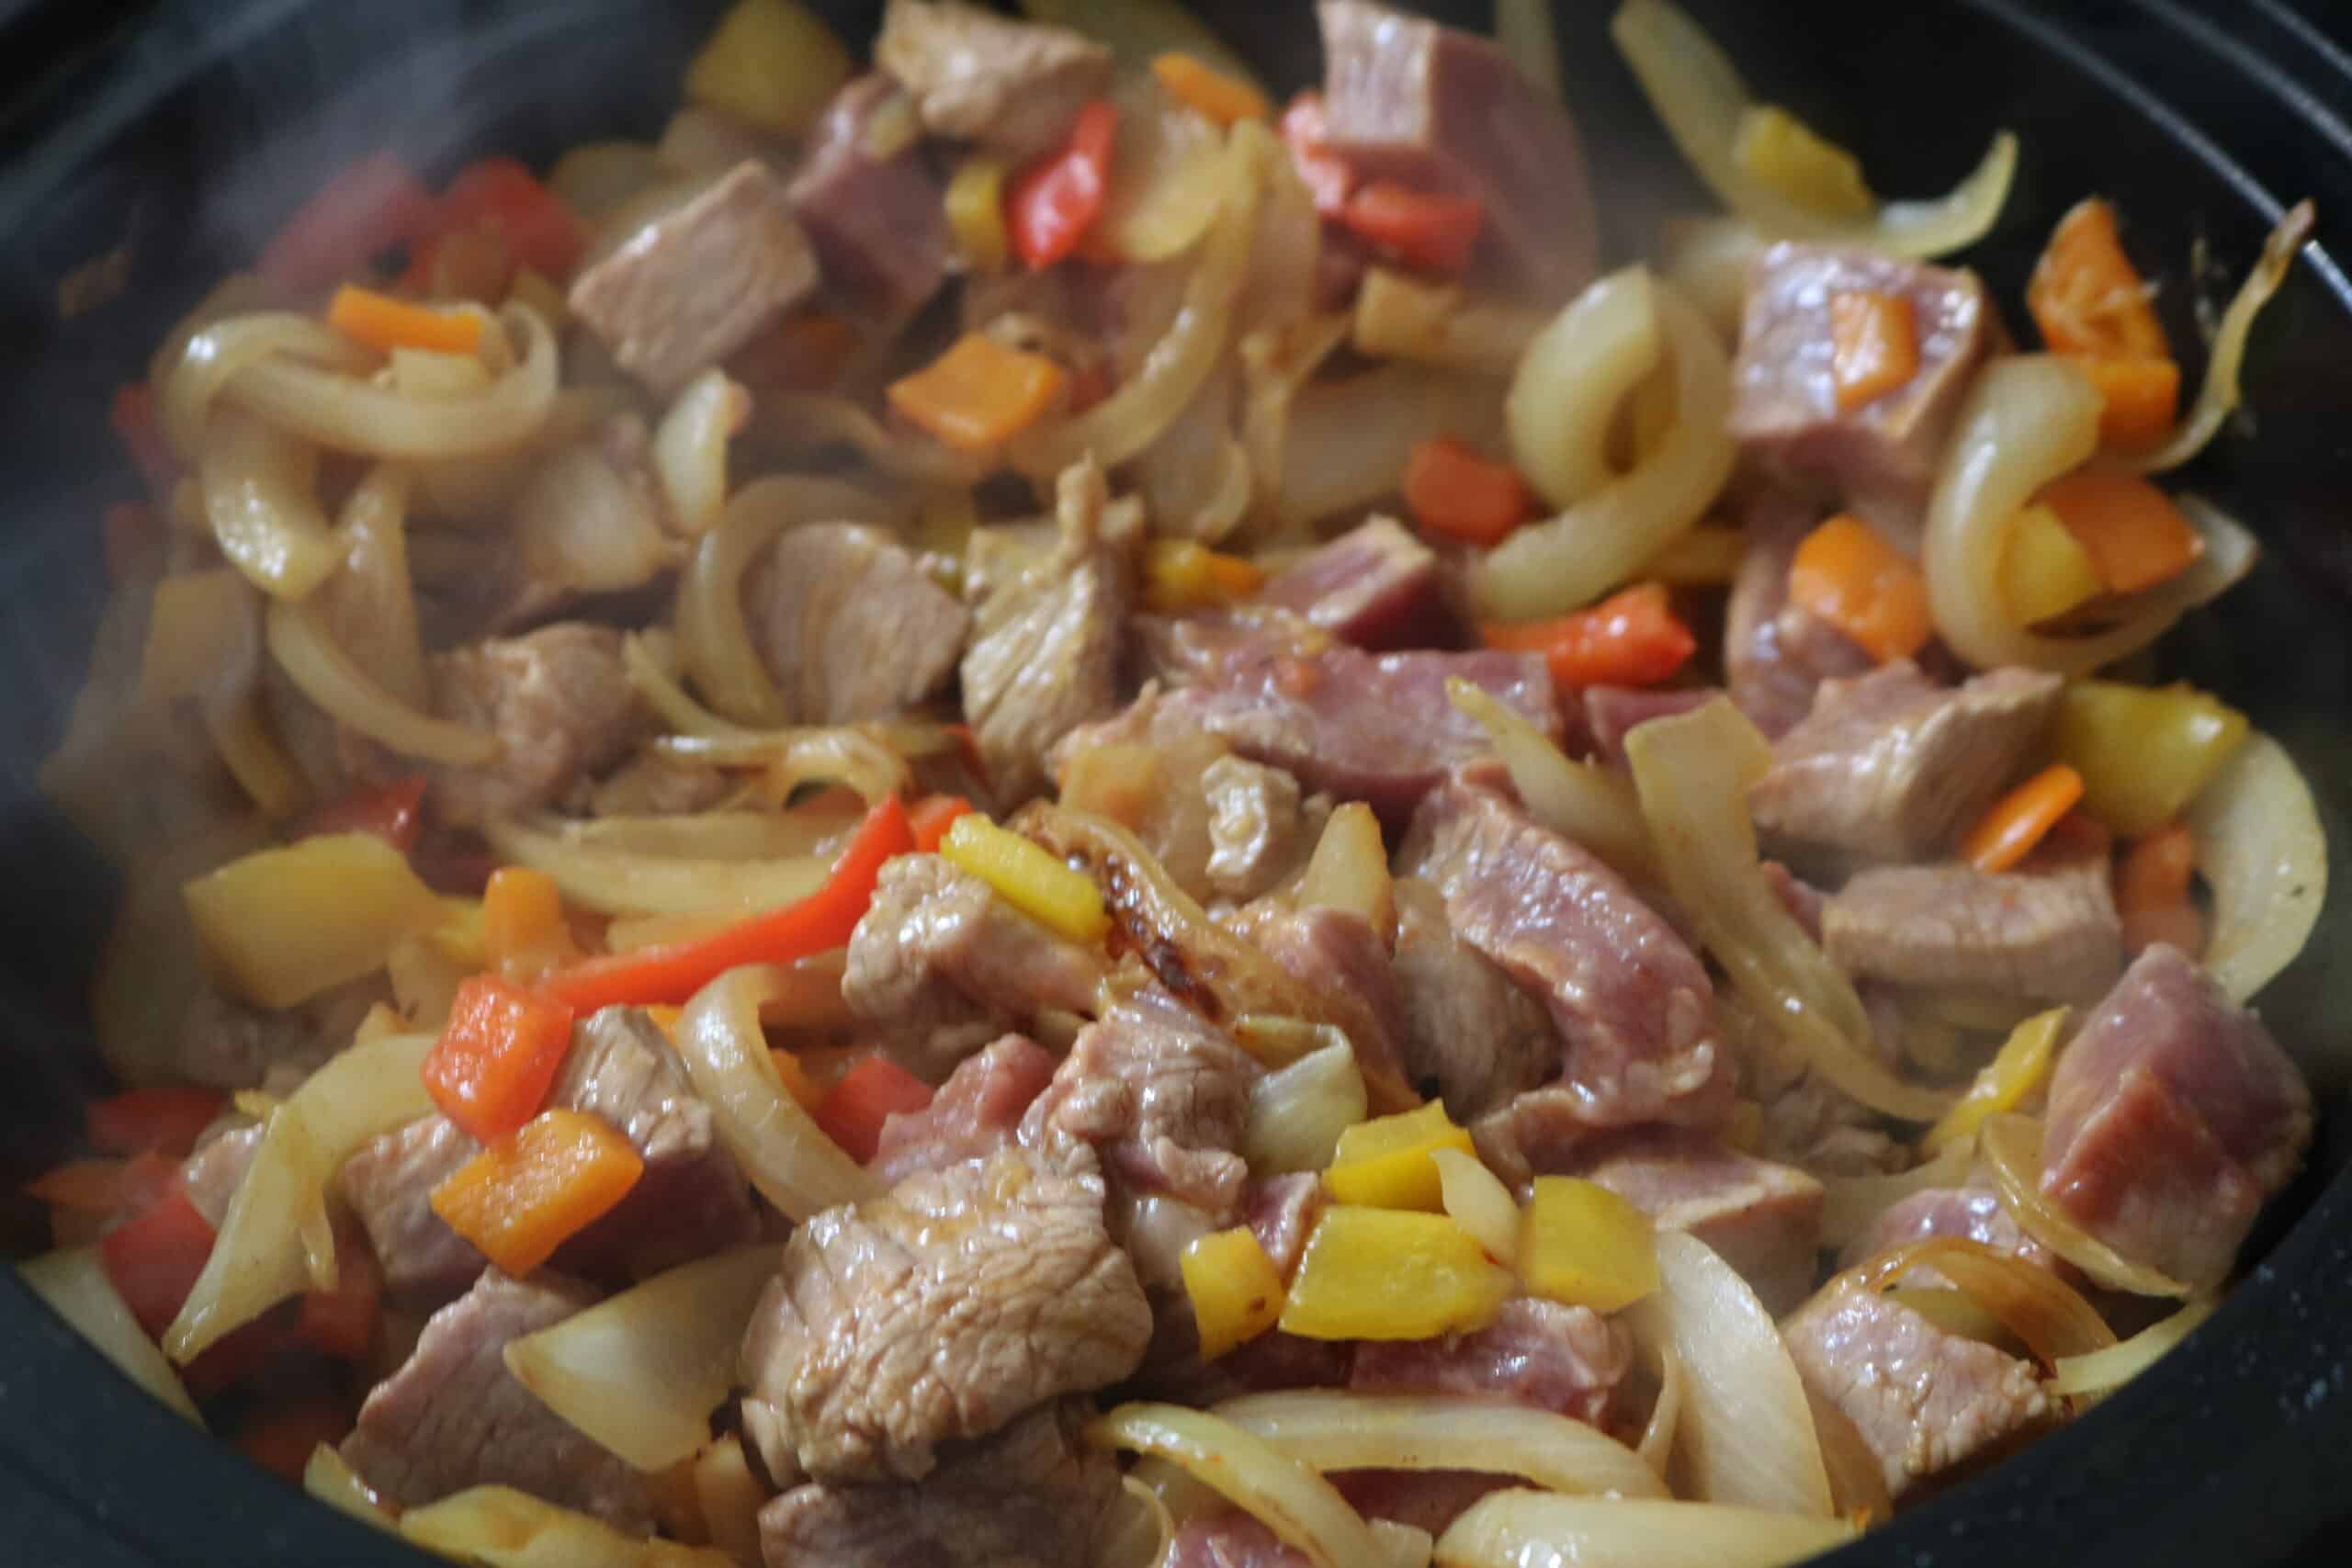 stir fry vegetables with meat